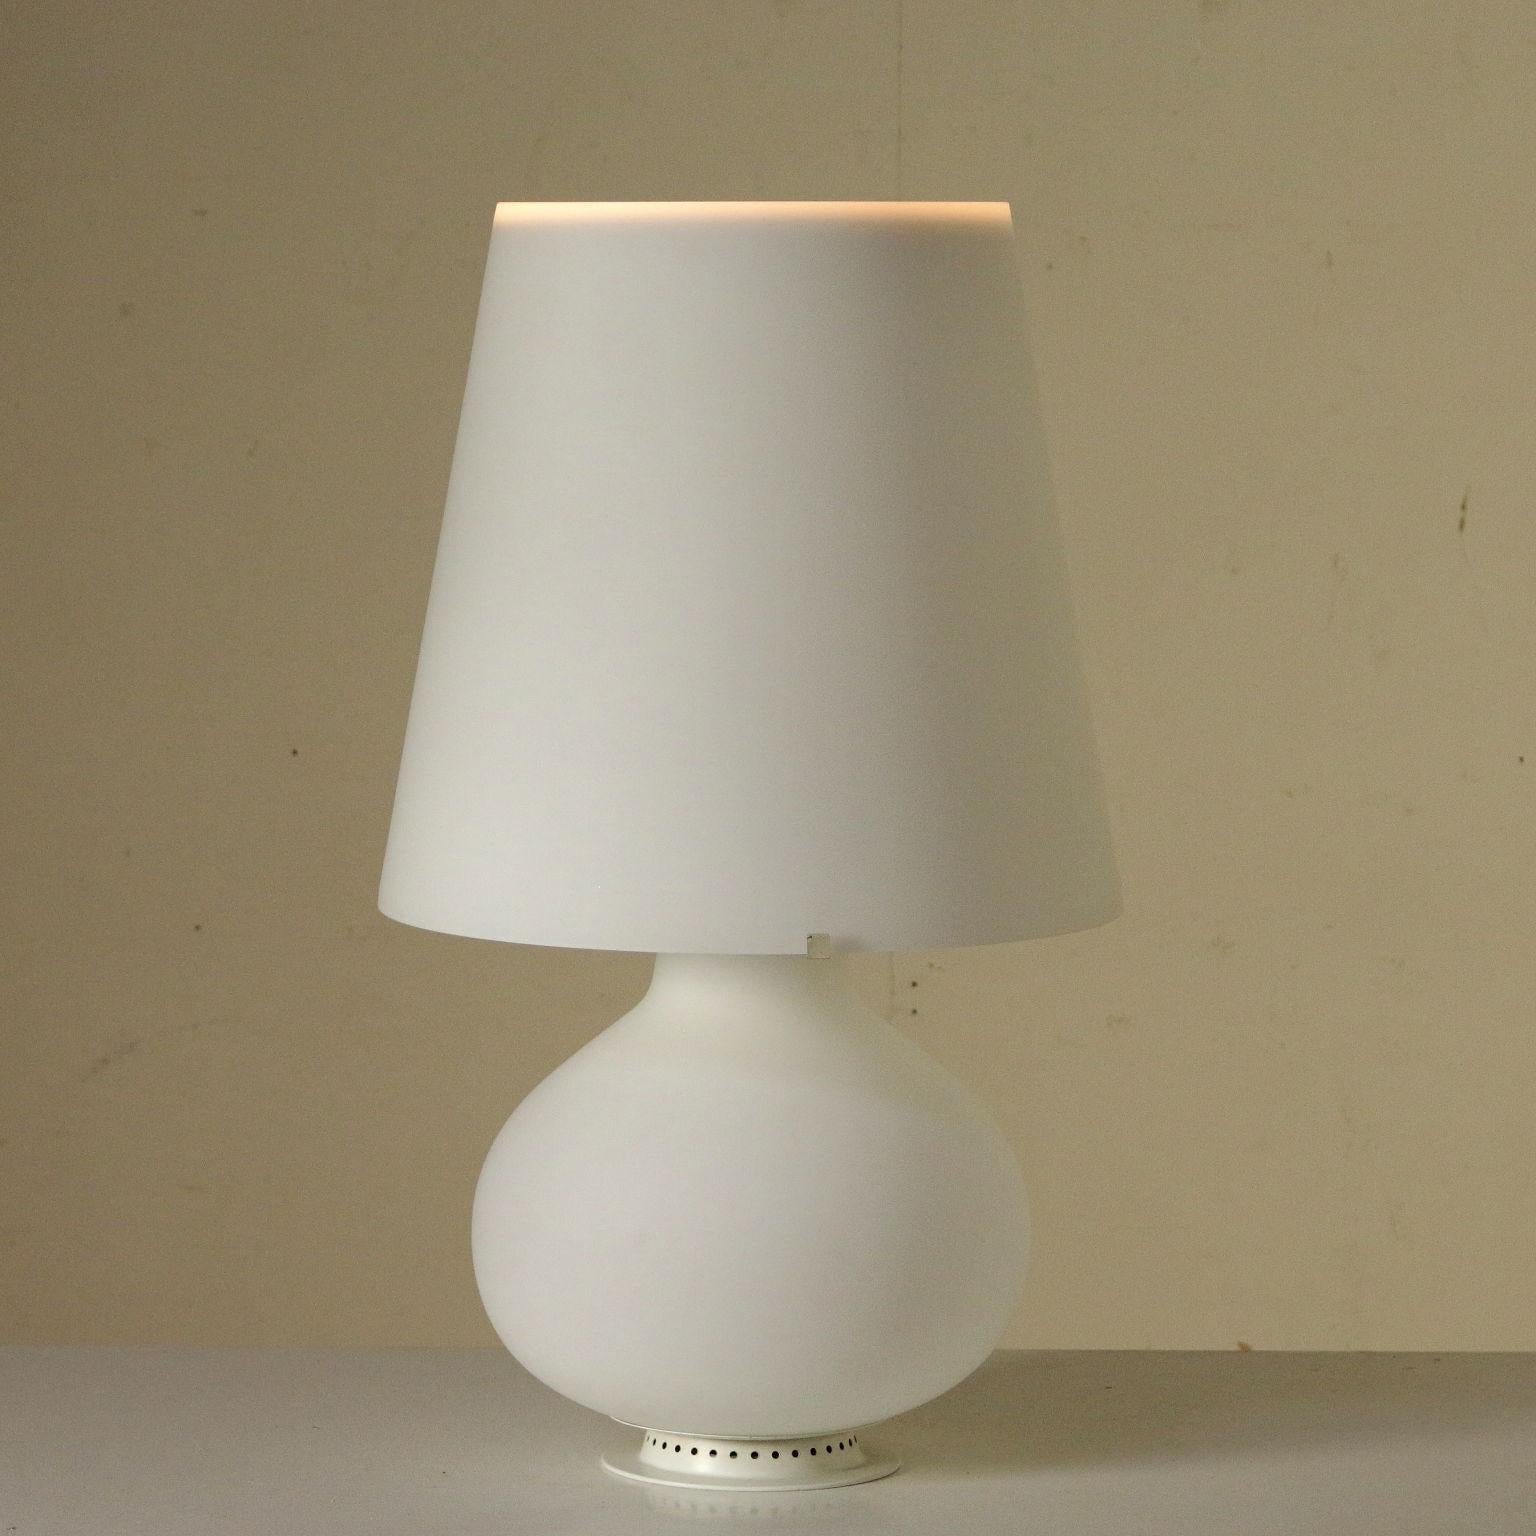 Italian Table Lamp by Max Ingrand for Fontana Arte Vintage, Italy, 1960s-1970s